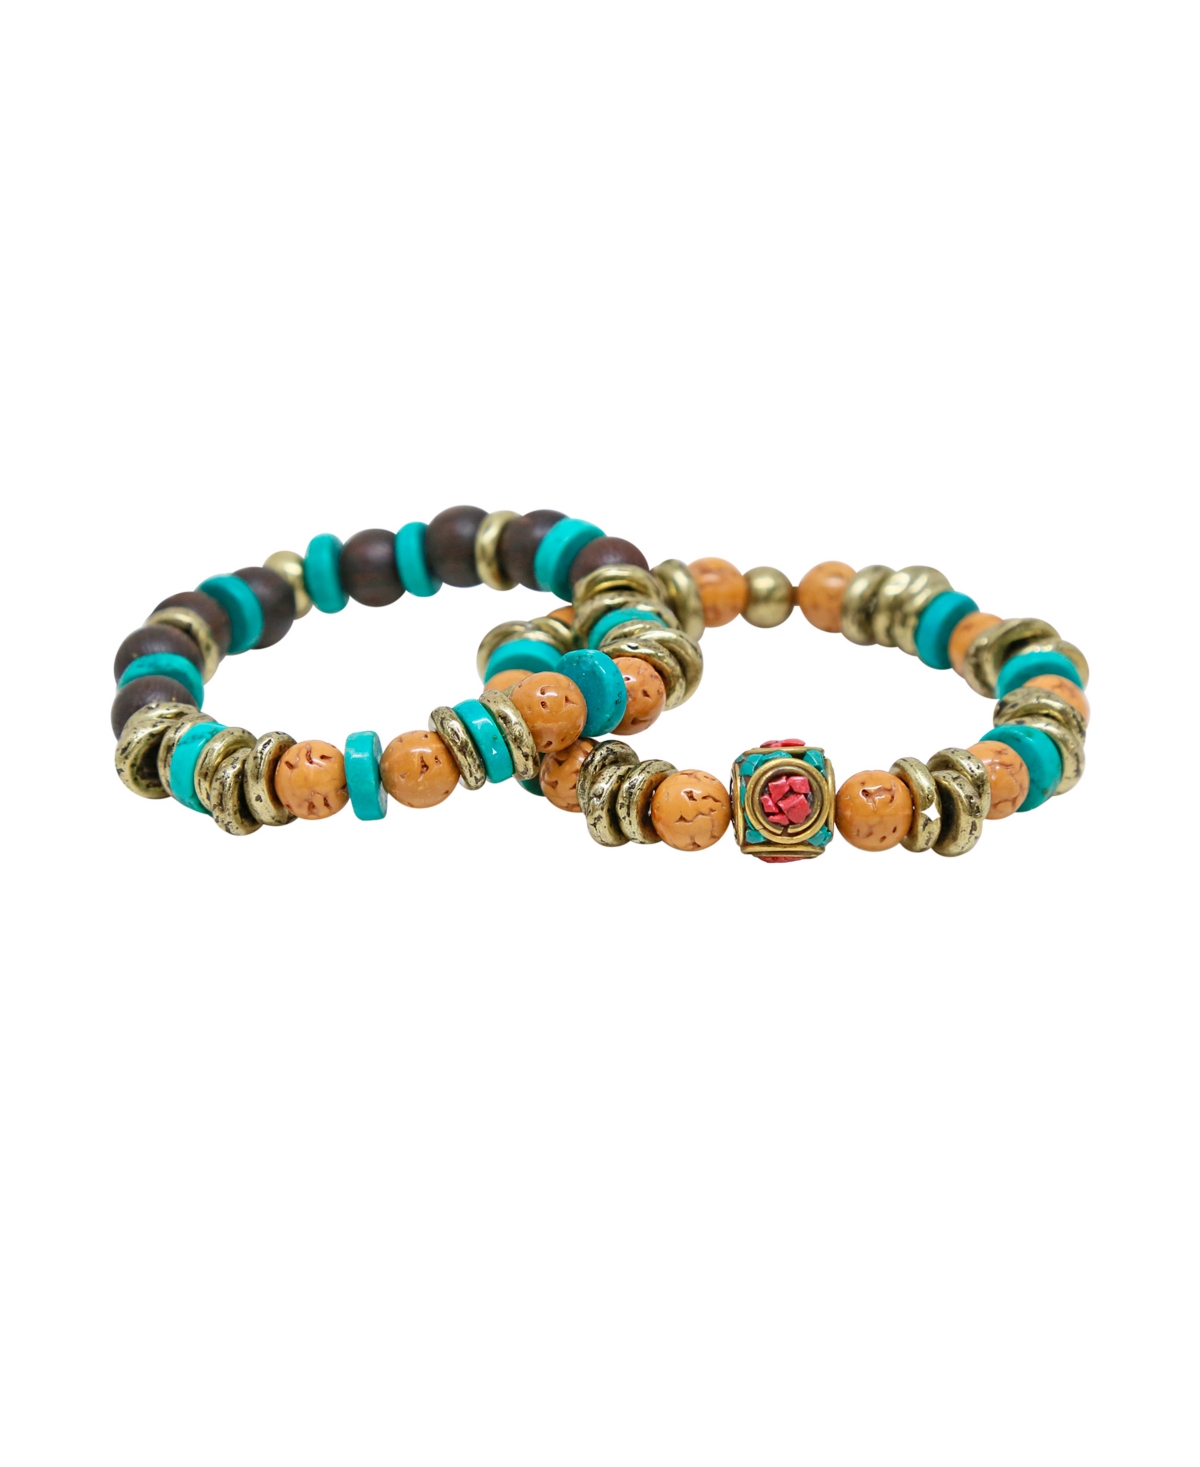 Turquoise, Wood and Brass Elastic Bracelet, Pack of 2 - Multi